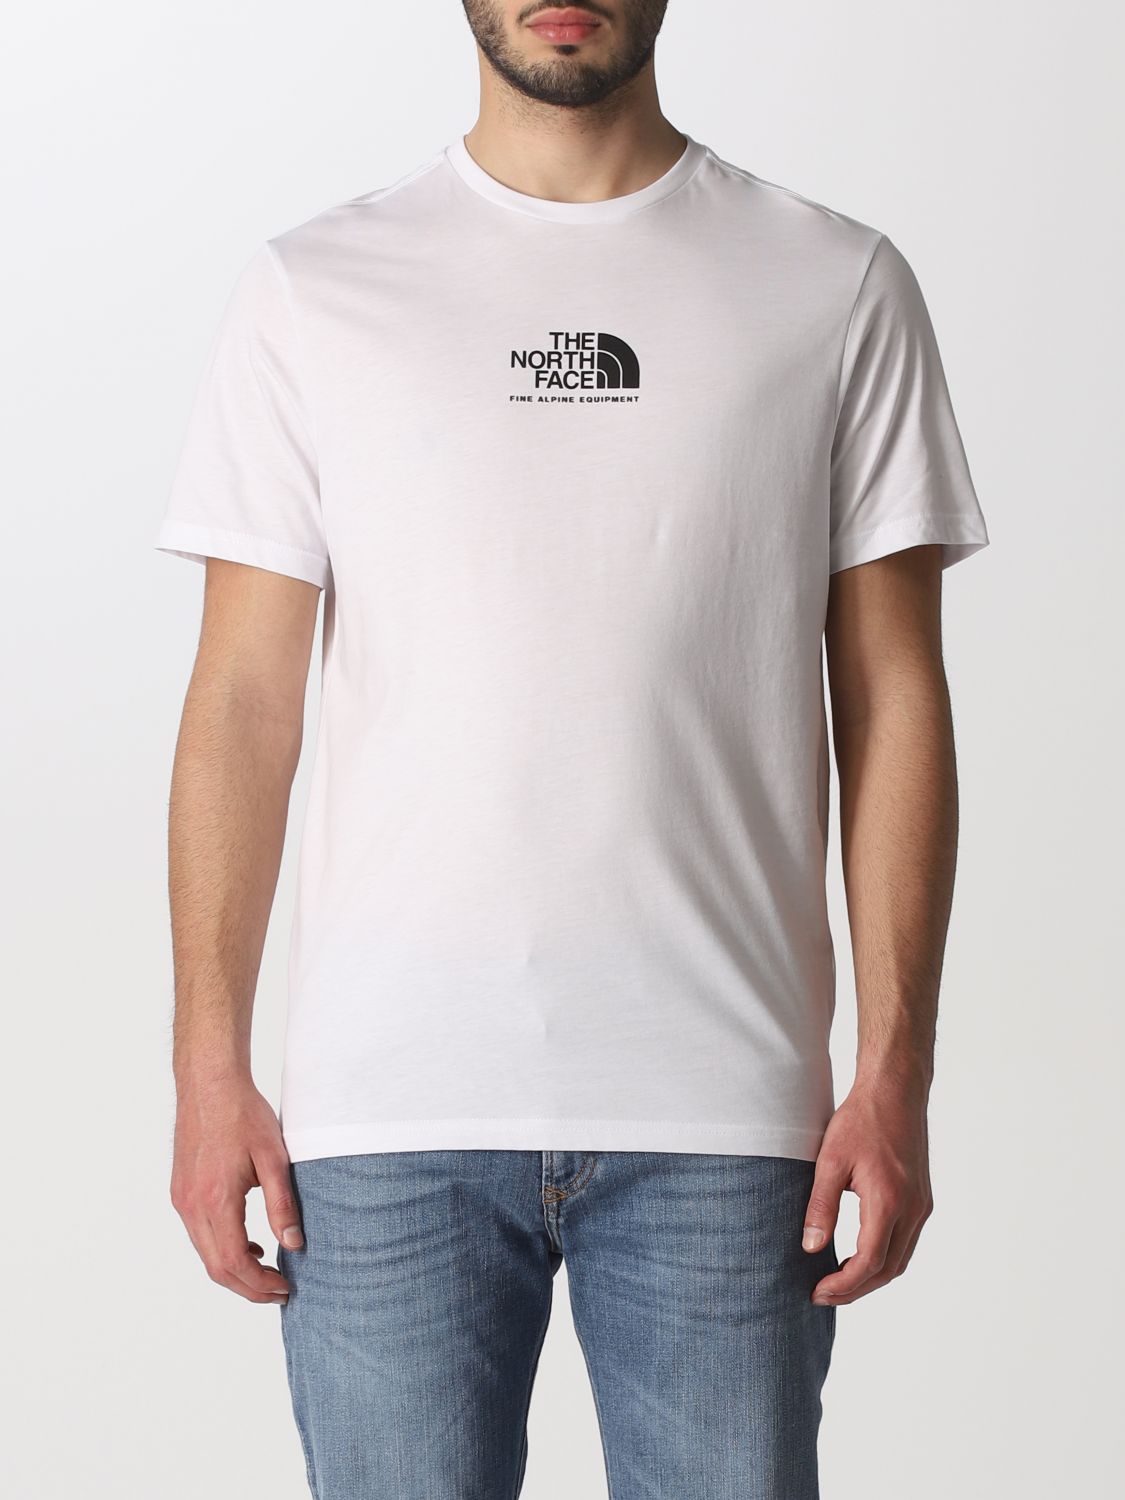 THE NORTH FACE: cotton t-shirt with logo - White | The North Face t ...